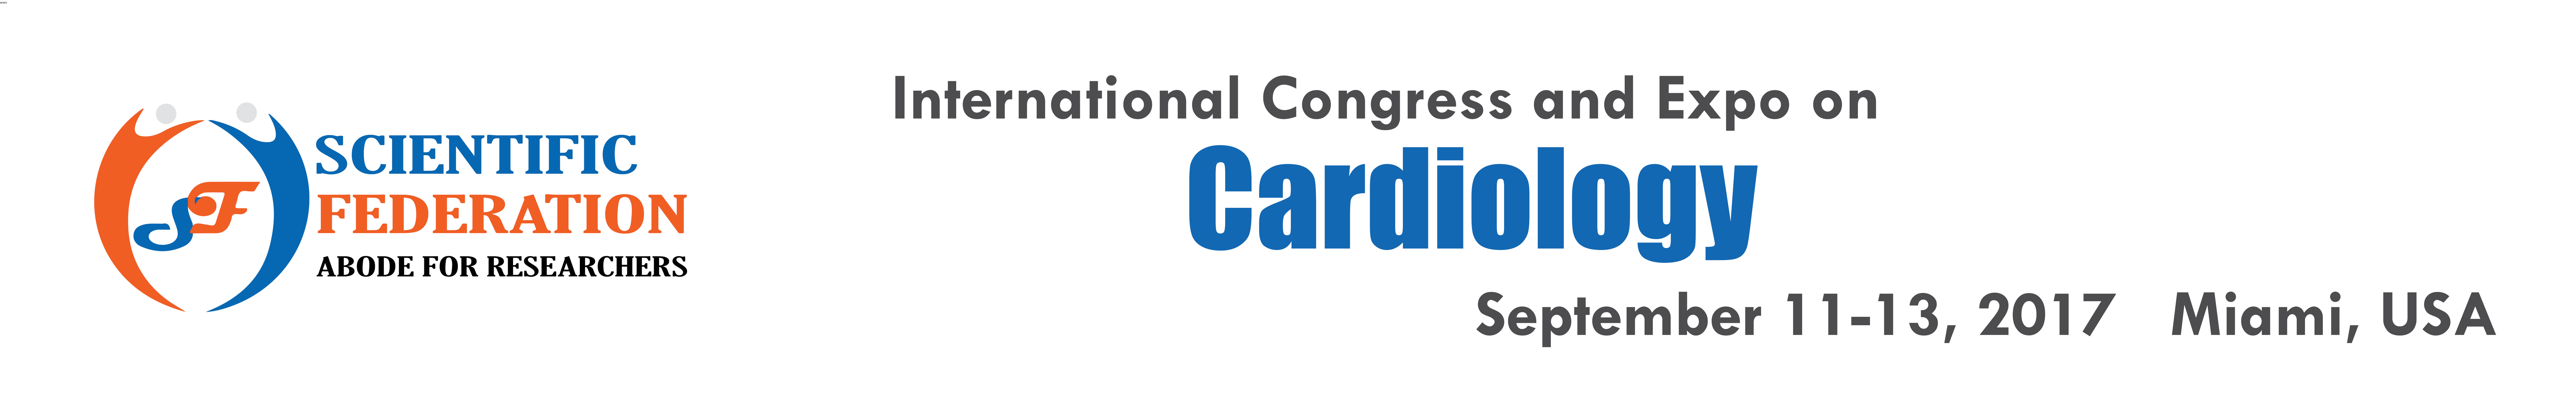 Scientific Federation invites all the participants from all over the world to attend International Congress and Expo on Cardiology during September 11-13, 2017 in Miami, USA which includes Keynote presentations, Oral talks, Poster presentations and Exhibitions. 